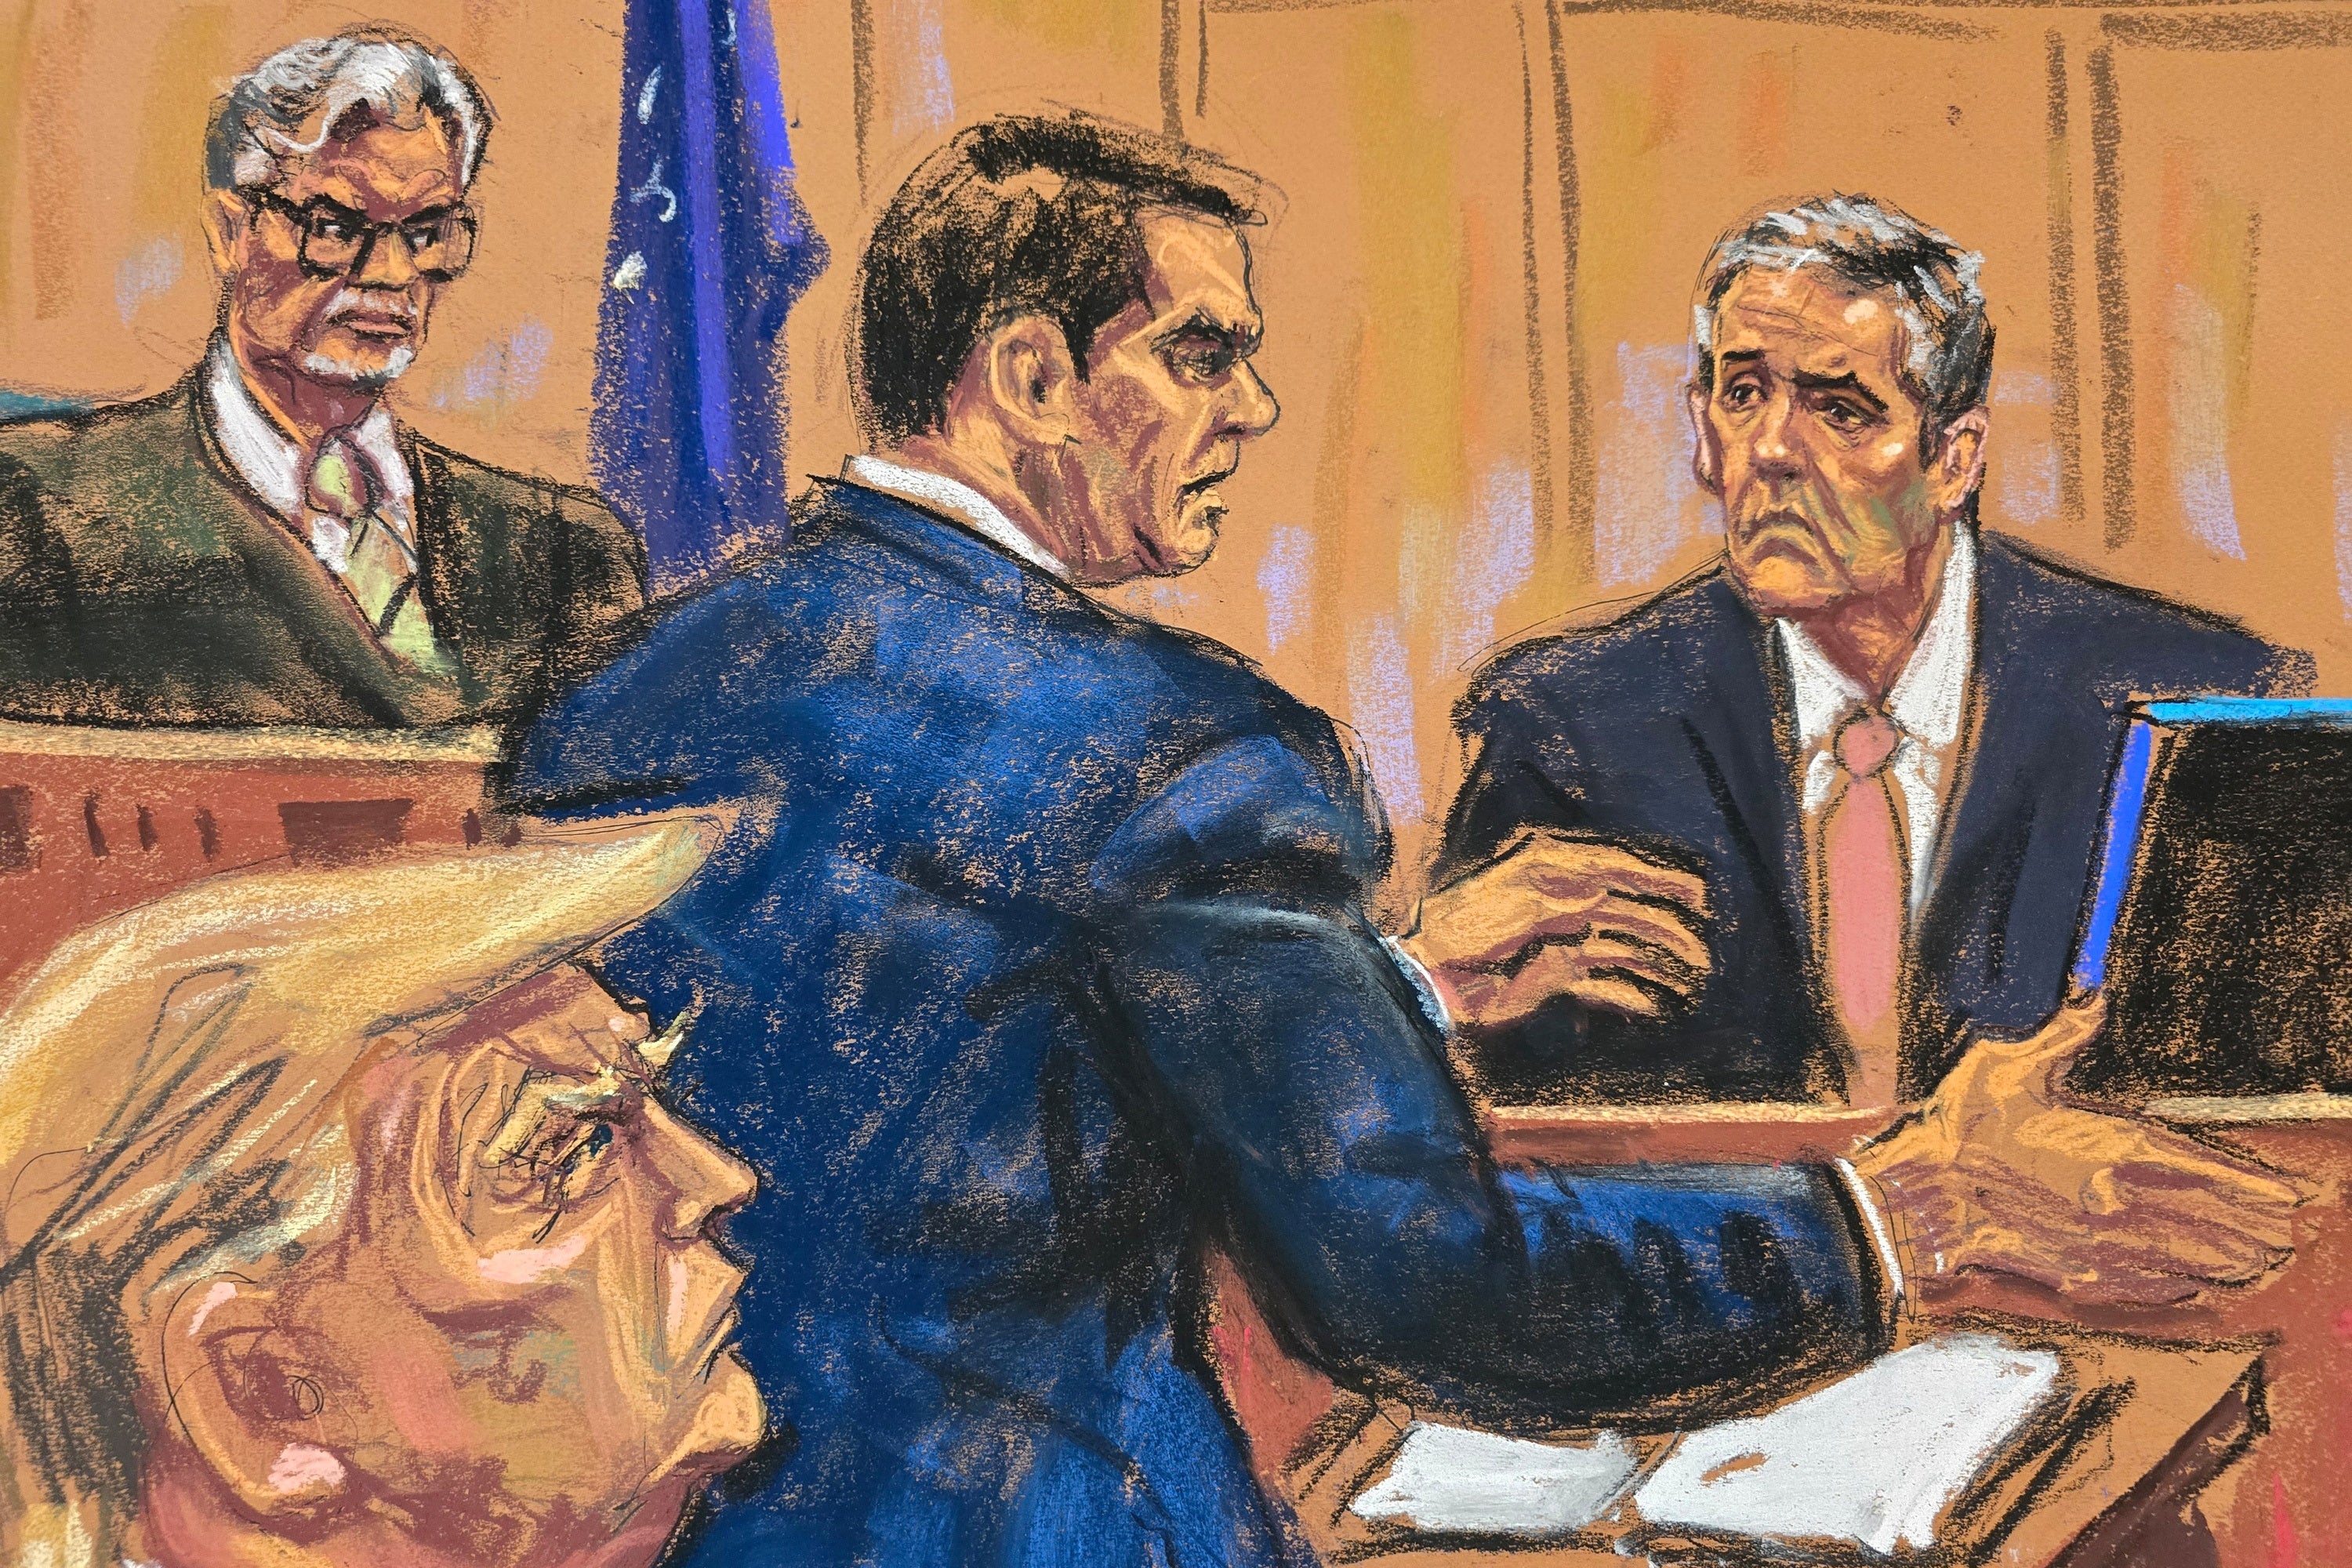 A courtroom sketch from May 20 depicts Todd Blanche questioning Michael Cohen while Donald Trump and Justice Juan Merchan look on.